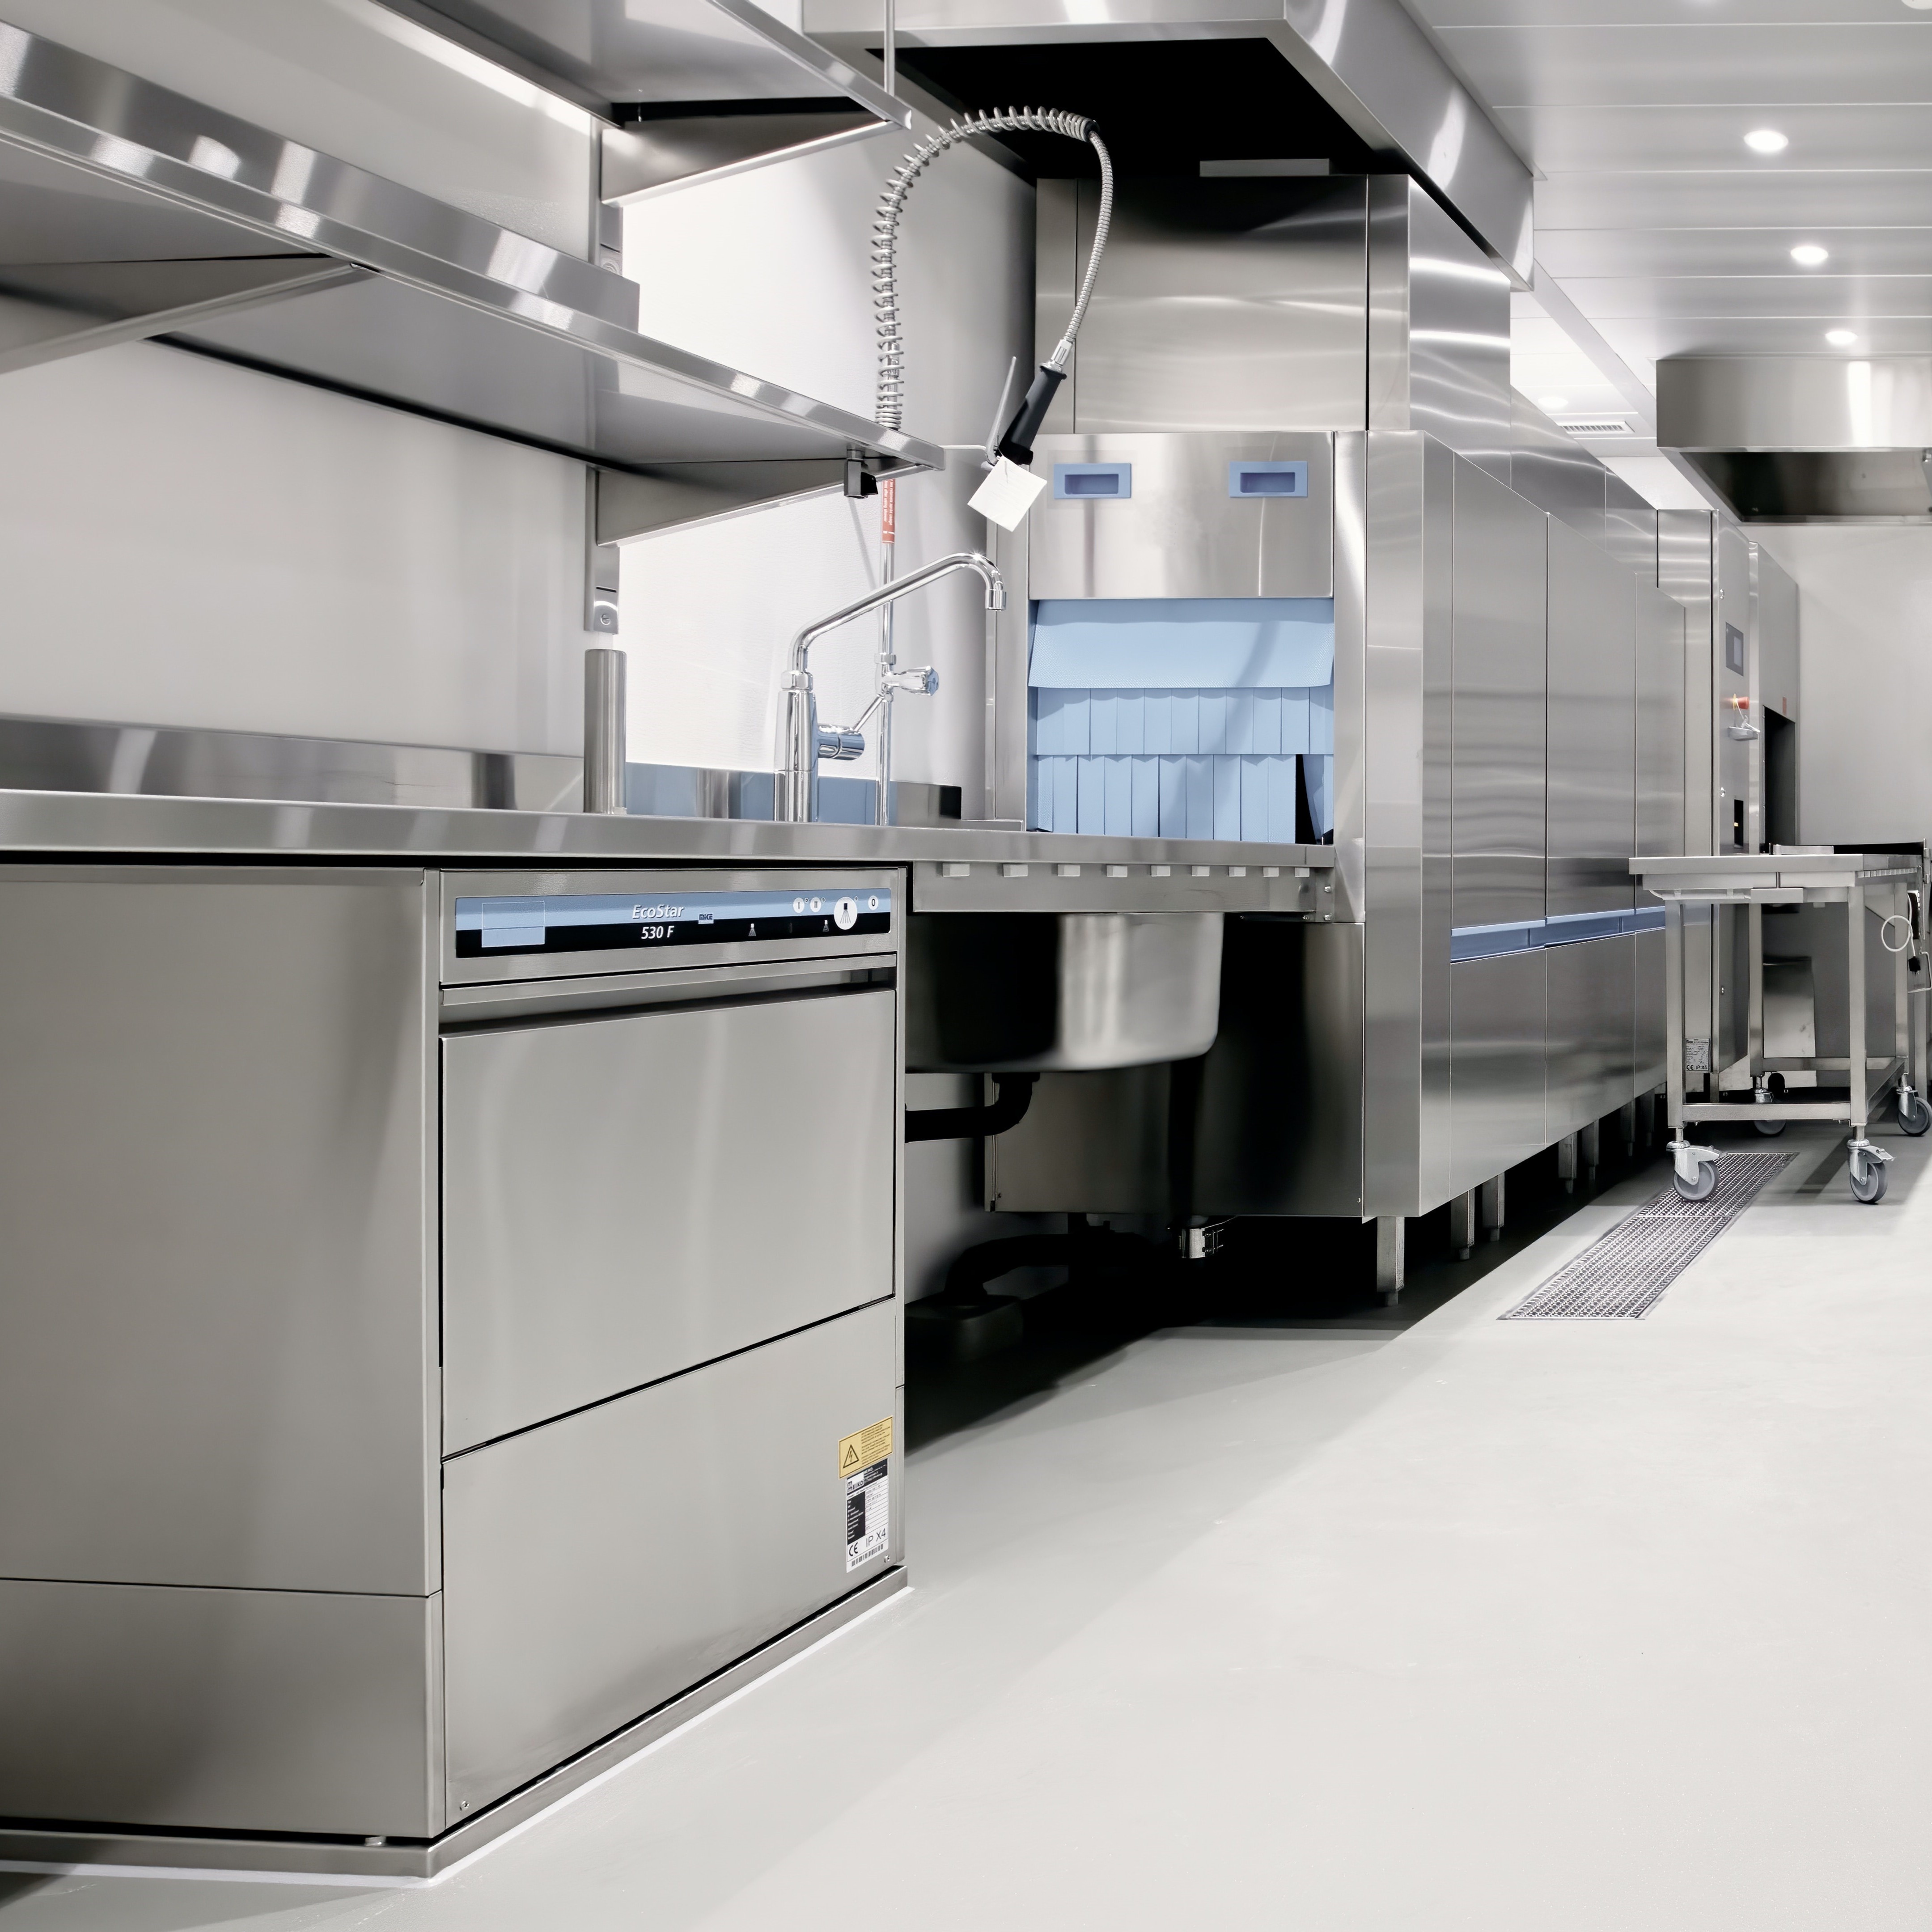 Industrial appliances for a commercial kitchen, including a dishwasher and dishwashing station